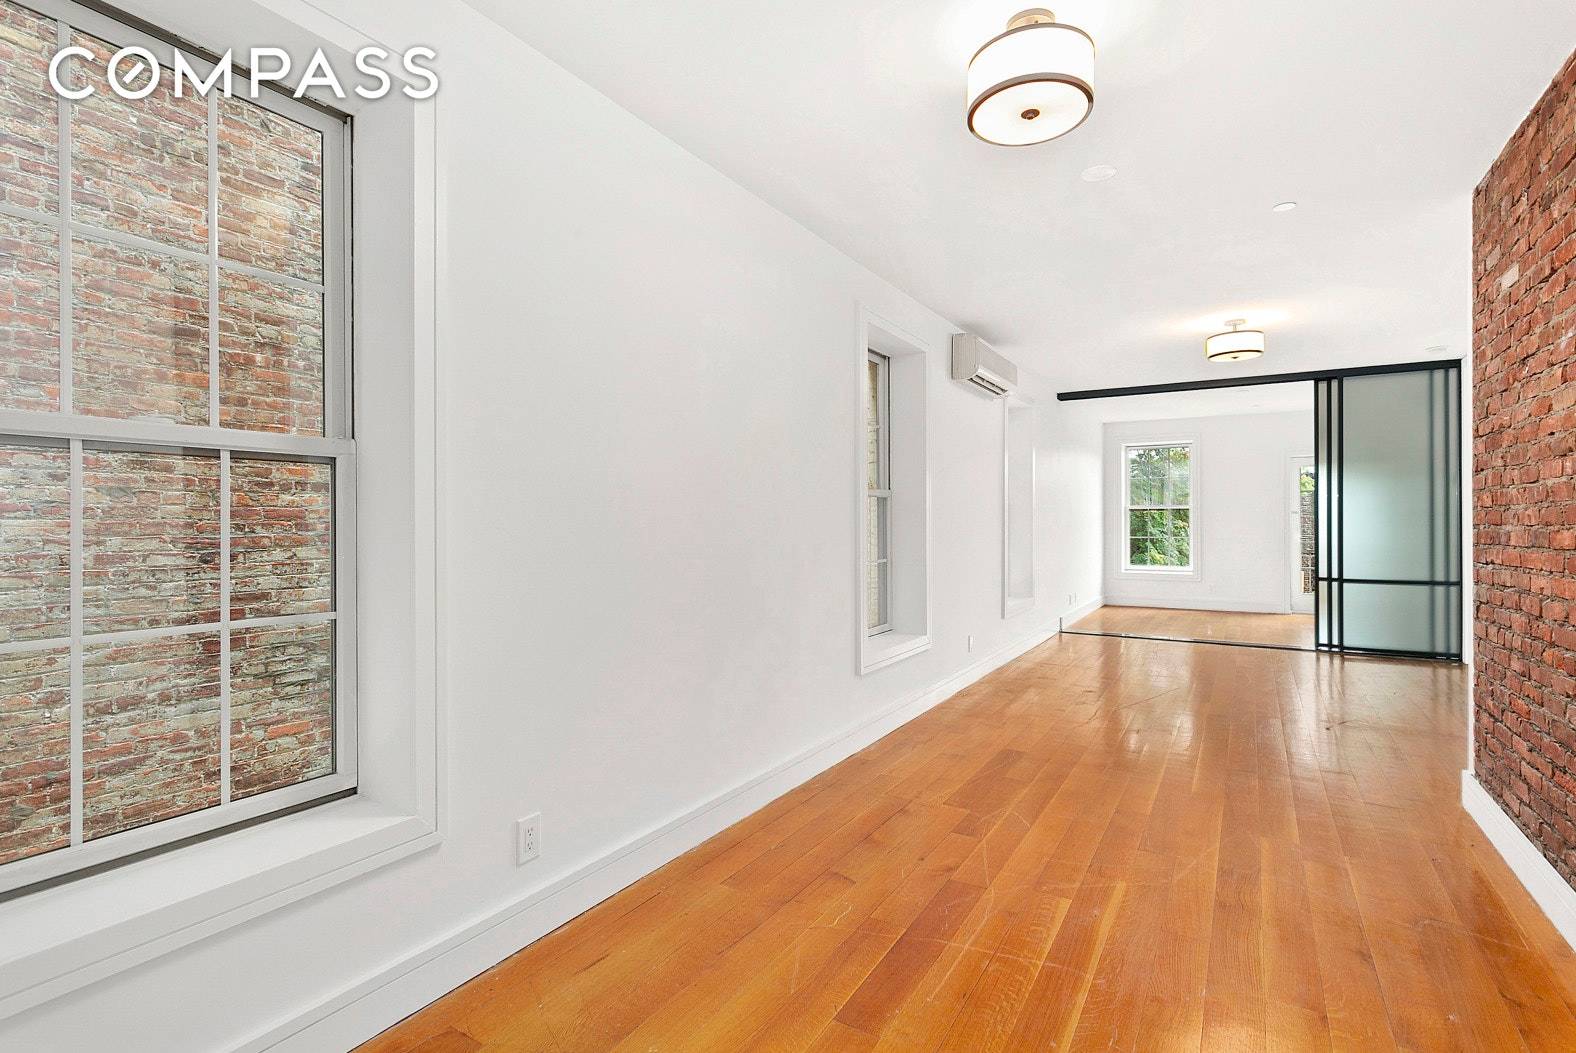 This bright and airy one bed, one bath on a prime Central Harlem block offers a gracious layout, beautiful hardwood floors, exposed brick, and a large private balcony.